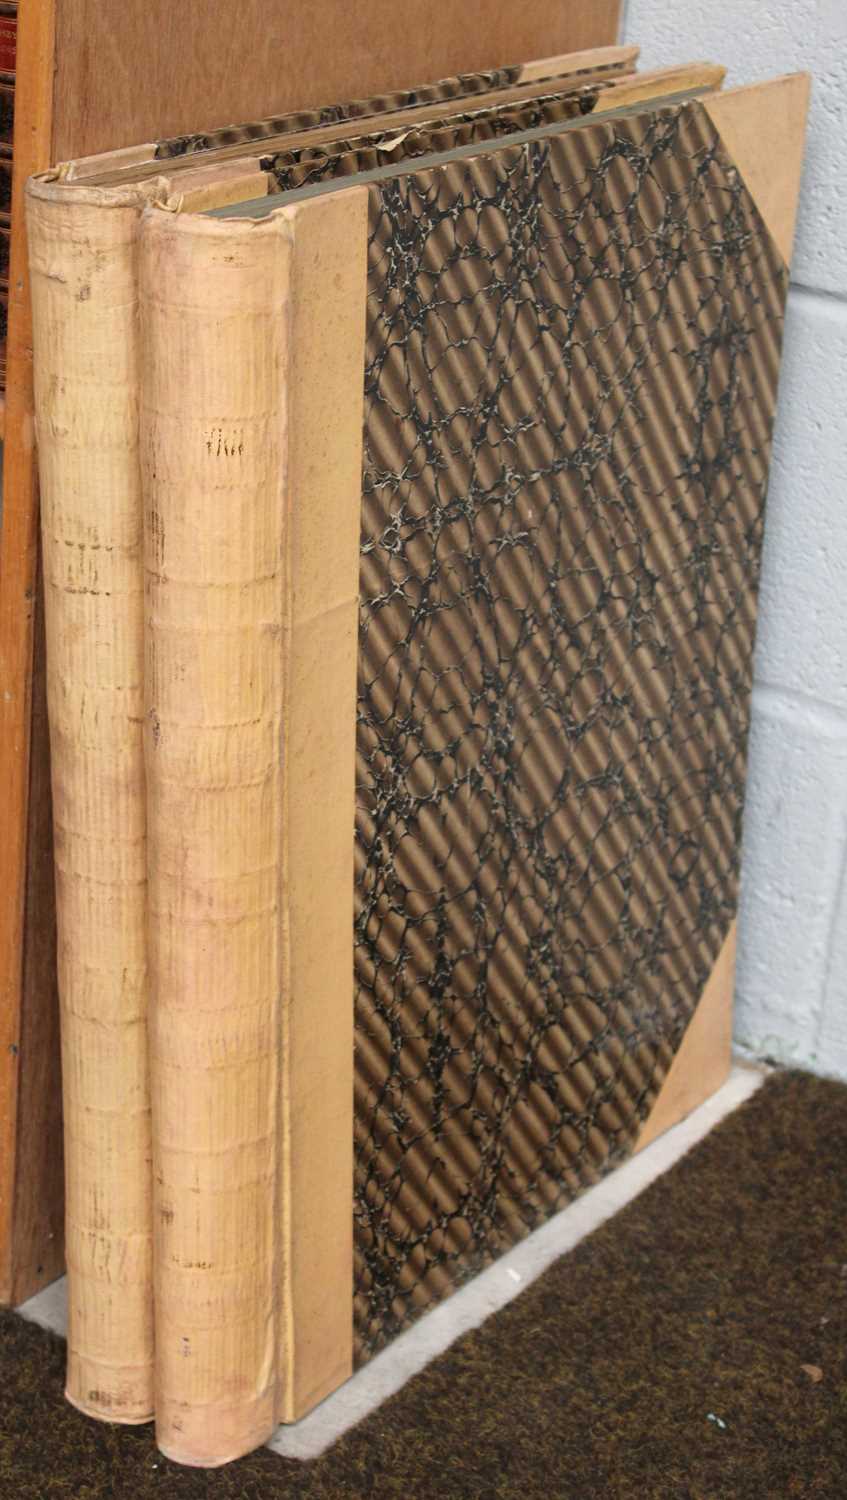 Two Large Unused Folio Scrapbooks/Albums, one with approx. 97 card leaves, the other with approx. 91